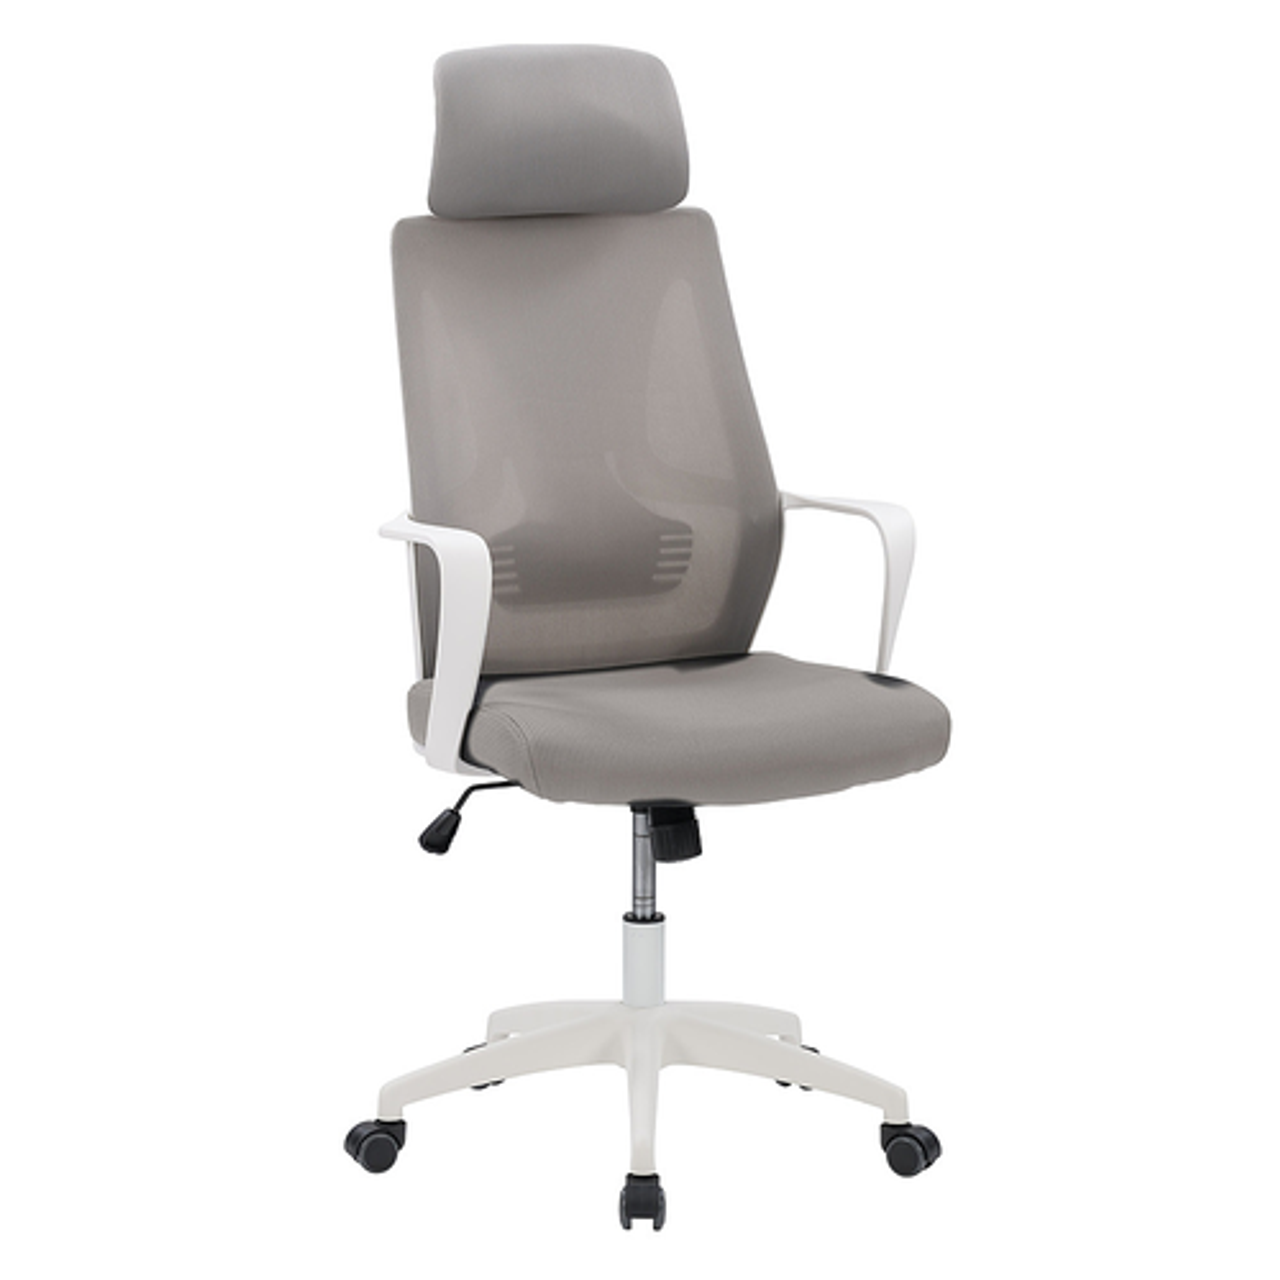 CorLiving Workspace Mesh Back Office Chair - Grey and White